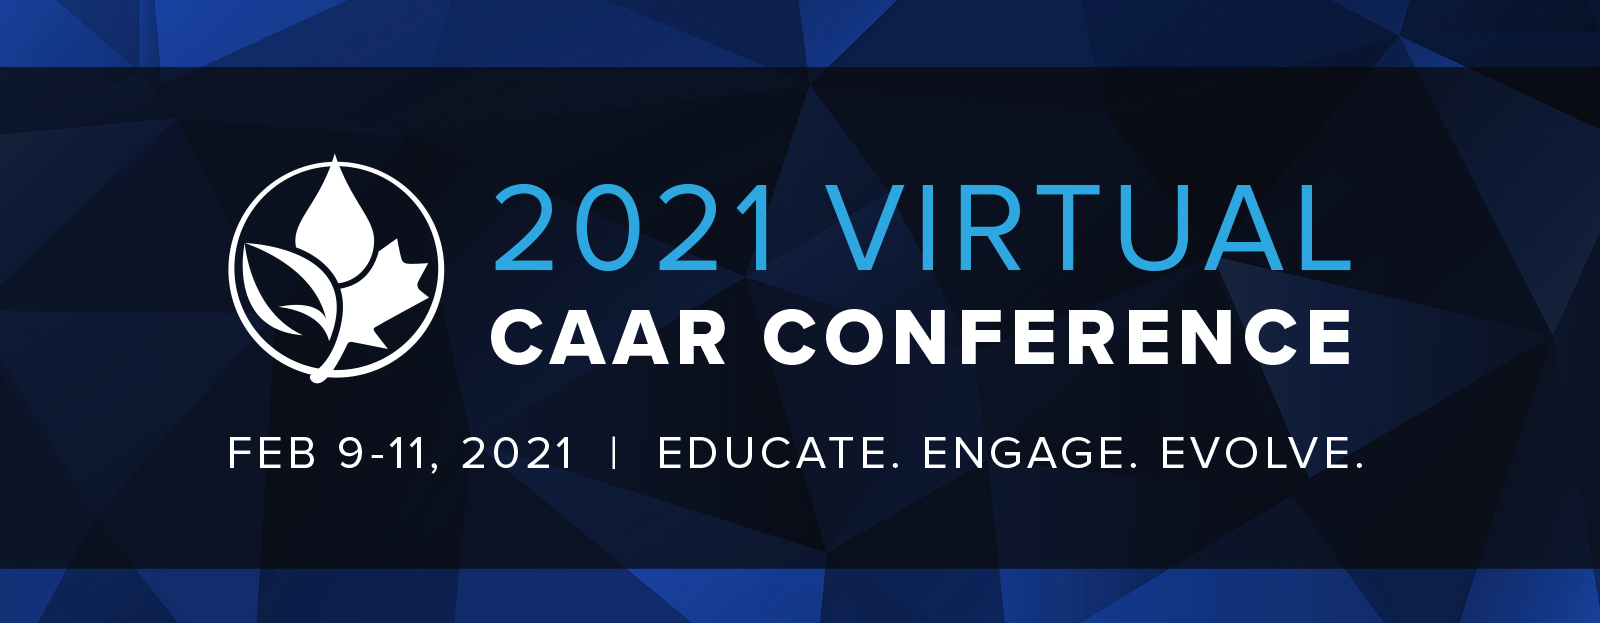 Banner for 2021 Virtual CAAR Conference